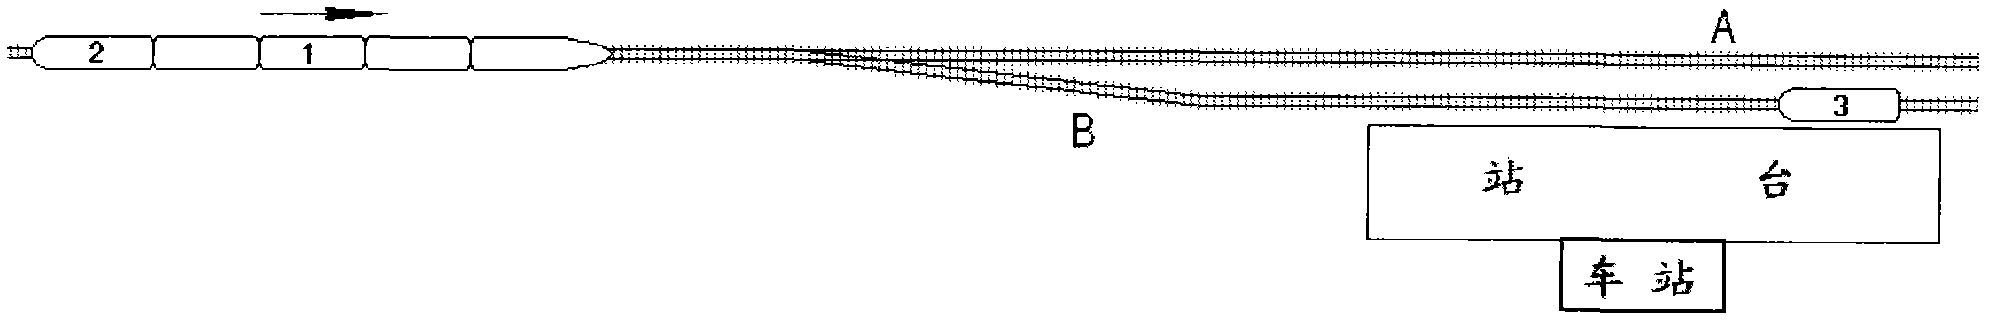 Method for enabling passengers to get on or off train without stop of rail train during operation